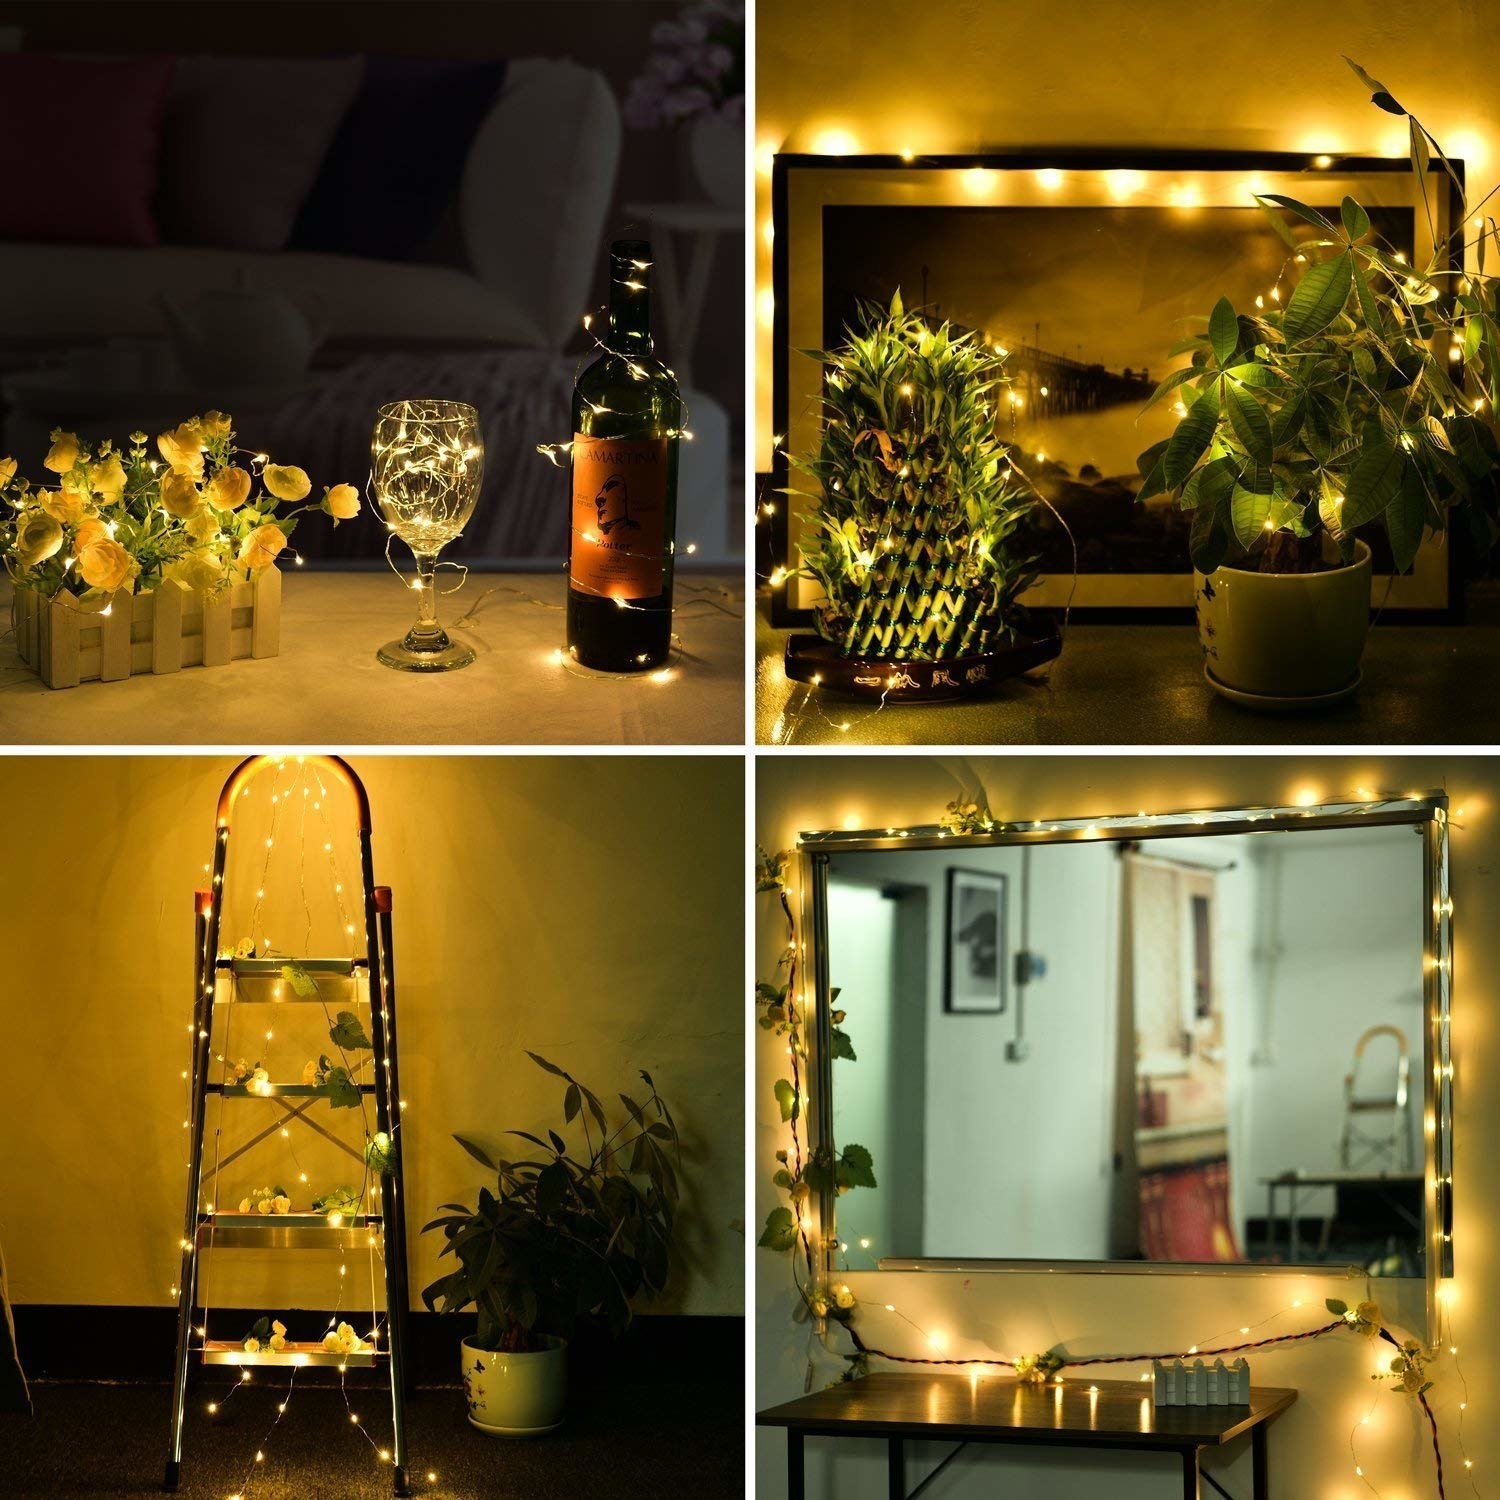 Various items draped with fairy lights, such as a wine glass and bottle, mirrors, ladders, and plants.